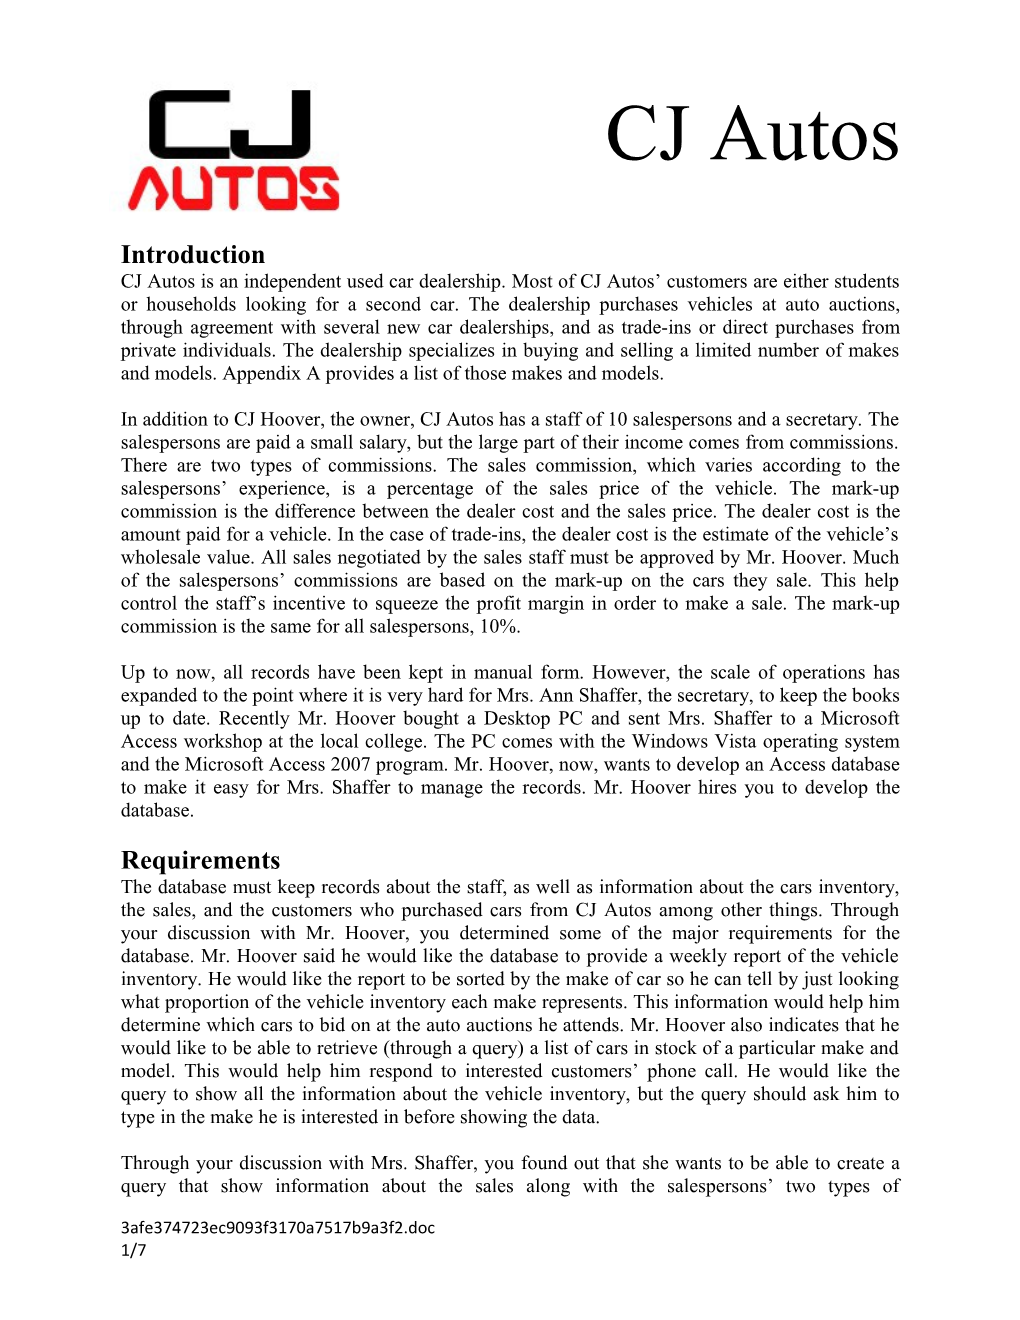 CJ Autos Is an Independent Used Car Dealership. Most of CJ Autos Customers Are Either Students